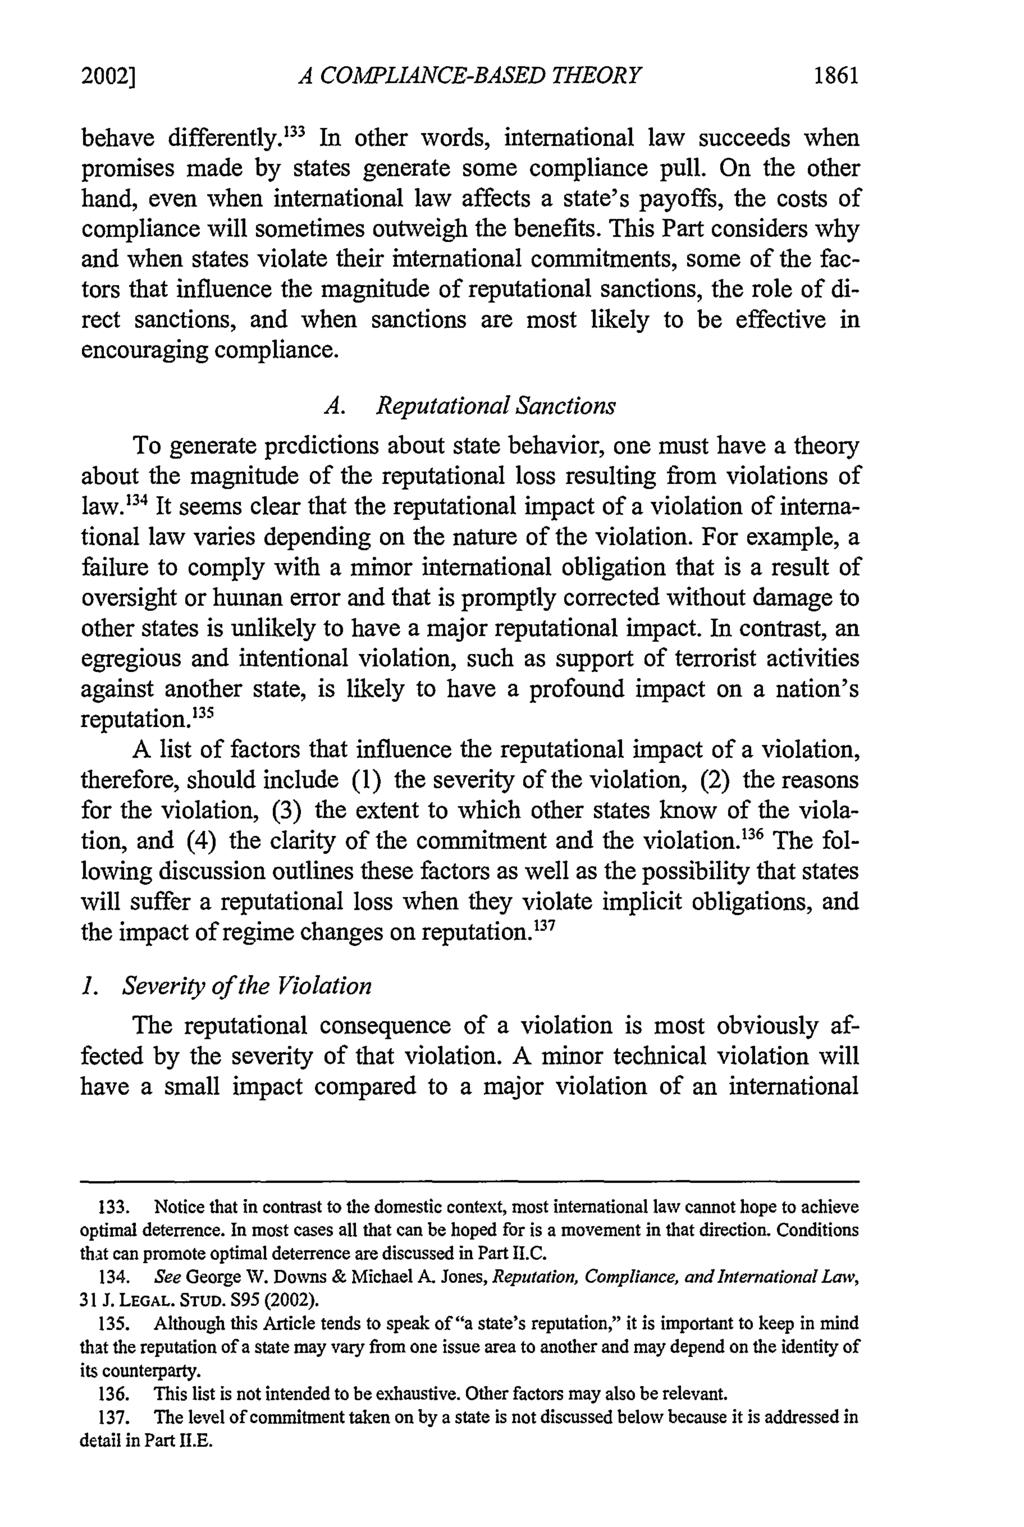 2002] A COMPLIANCE-BASED THEORY behave differently.' 33 In other words, international law succeeds when promises made by states generate some compliance pull.